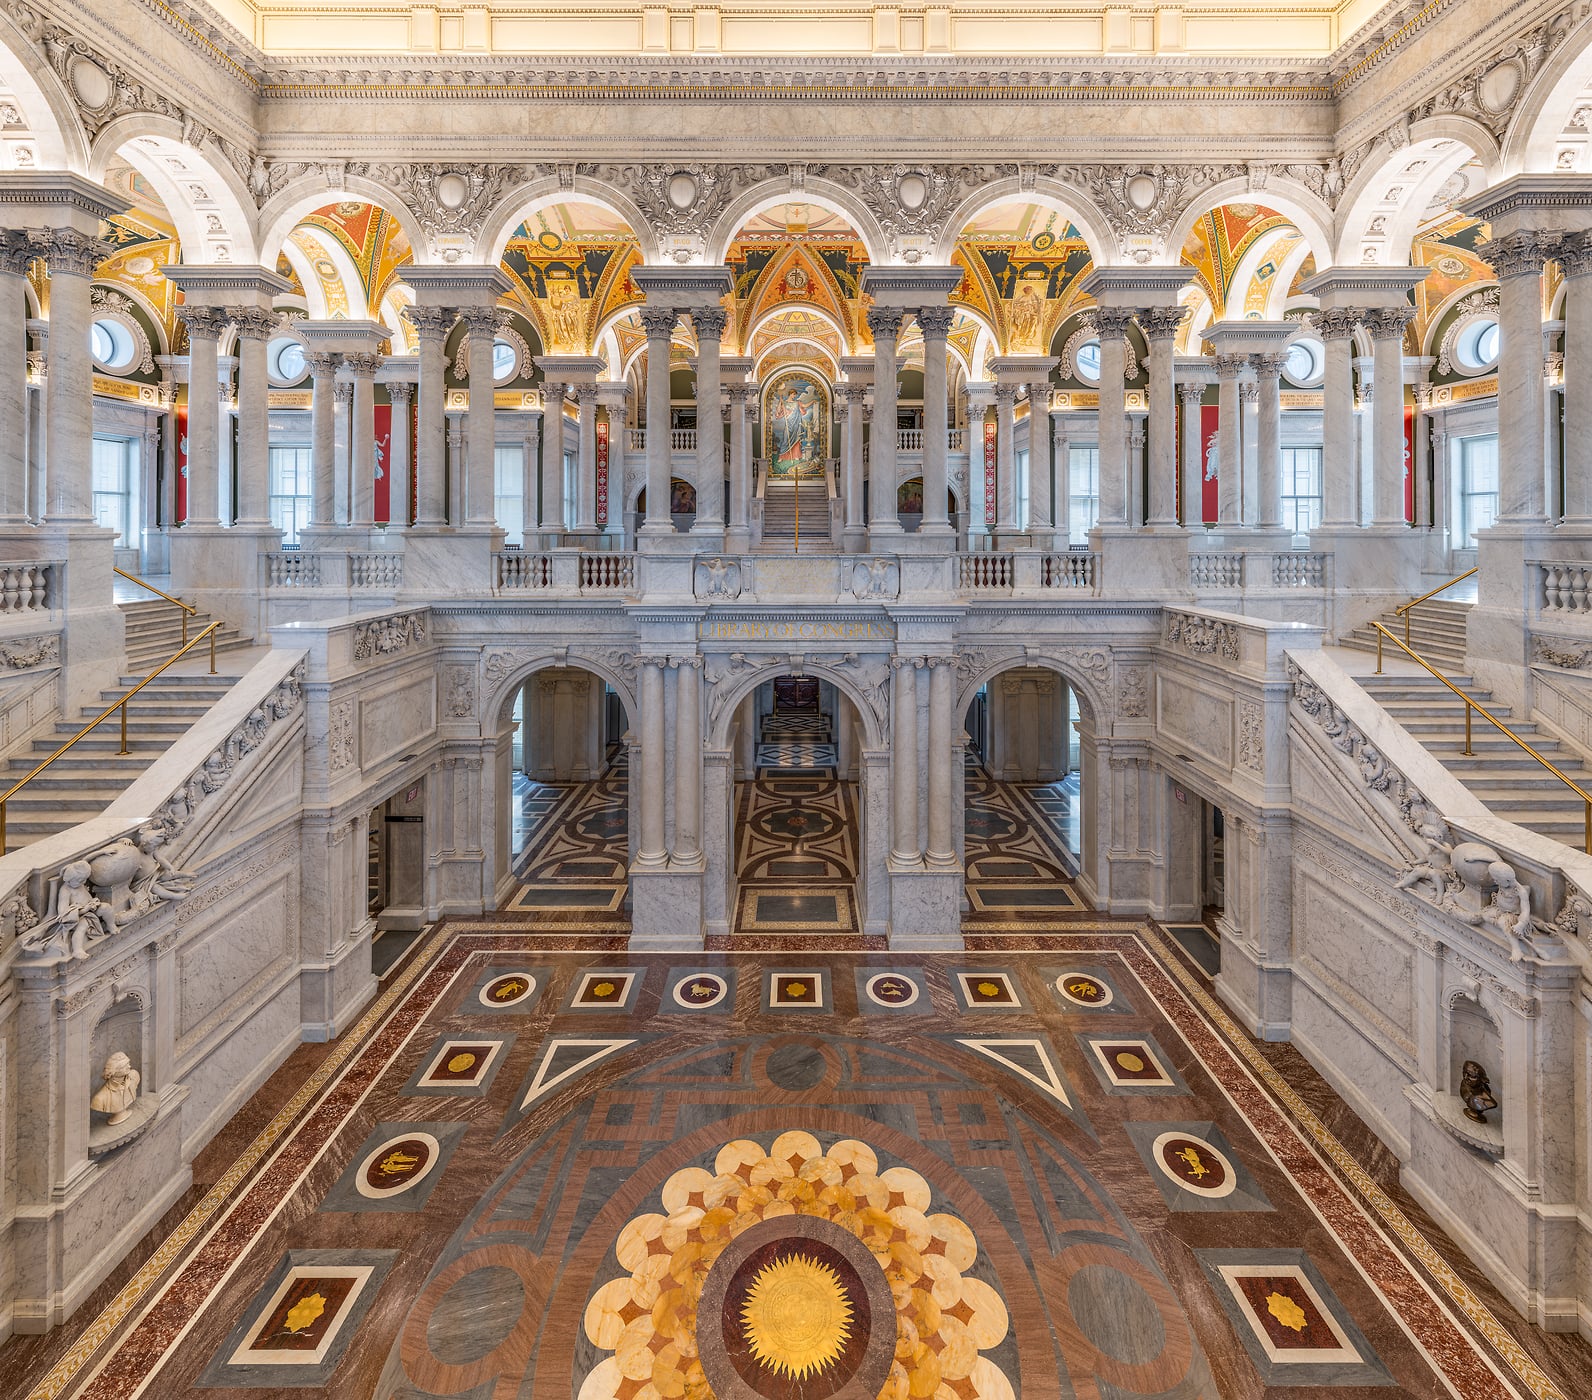 1,284 megapixels! A very high resolution, large-format VAST photo print of the Great Hall in the Library of Congress; interior architecture photograph created by Tim Lo Monaco in the Thomas Jefferson Building of the Library of Congress on Capitol Hill in Washington, D.C.